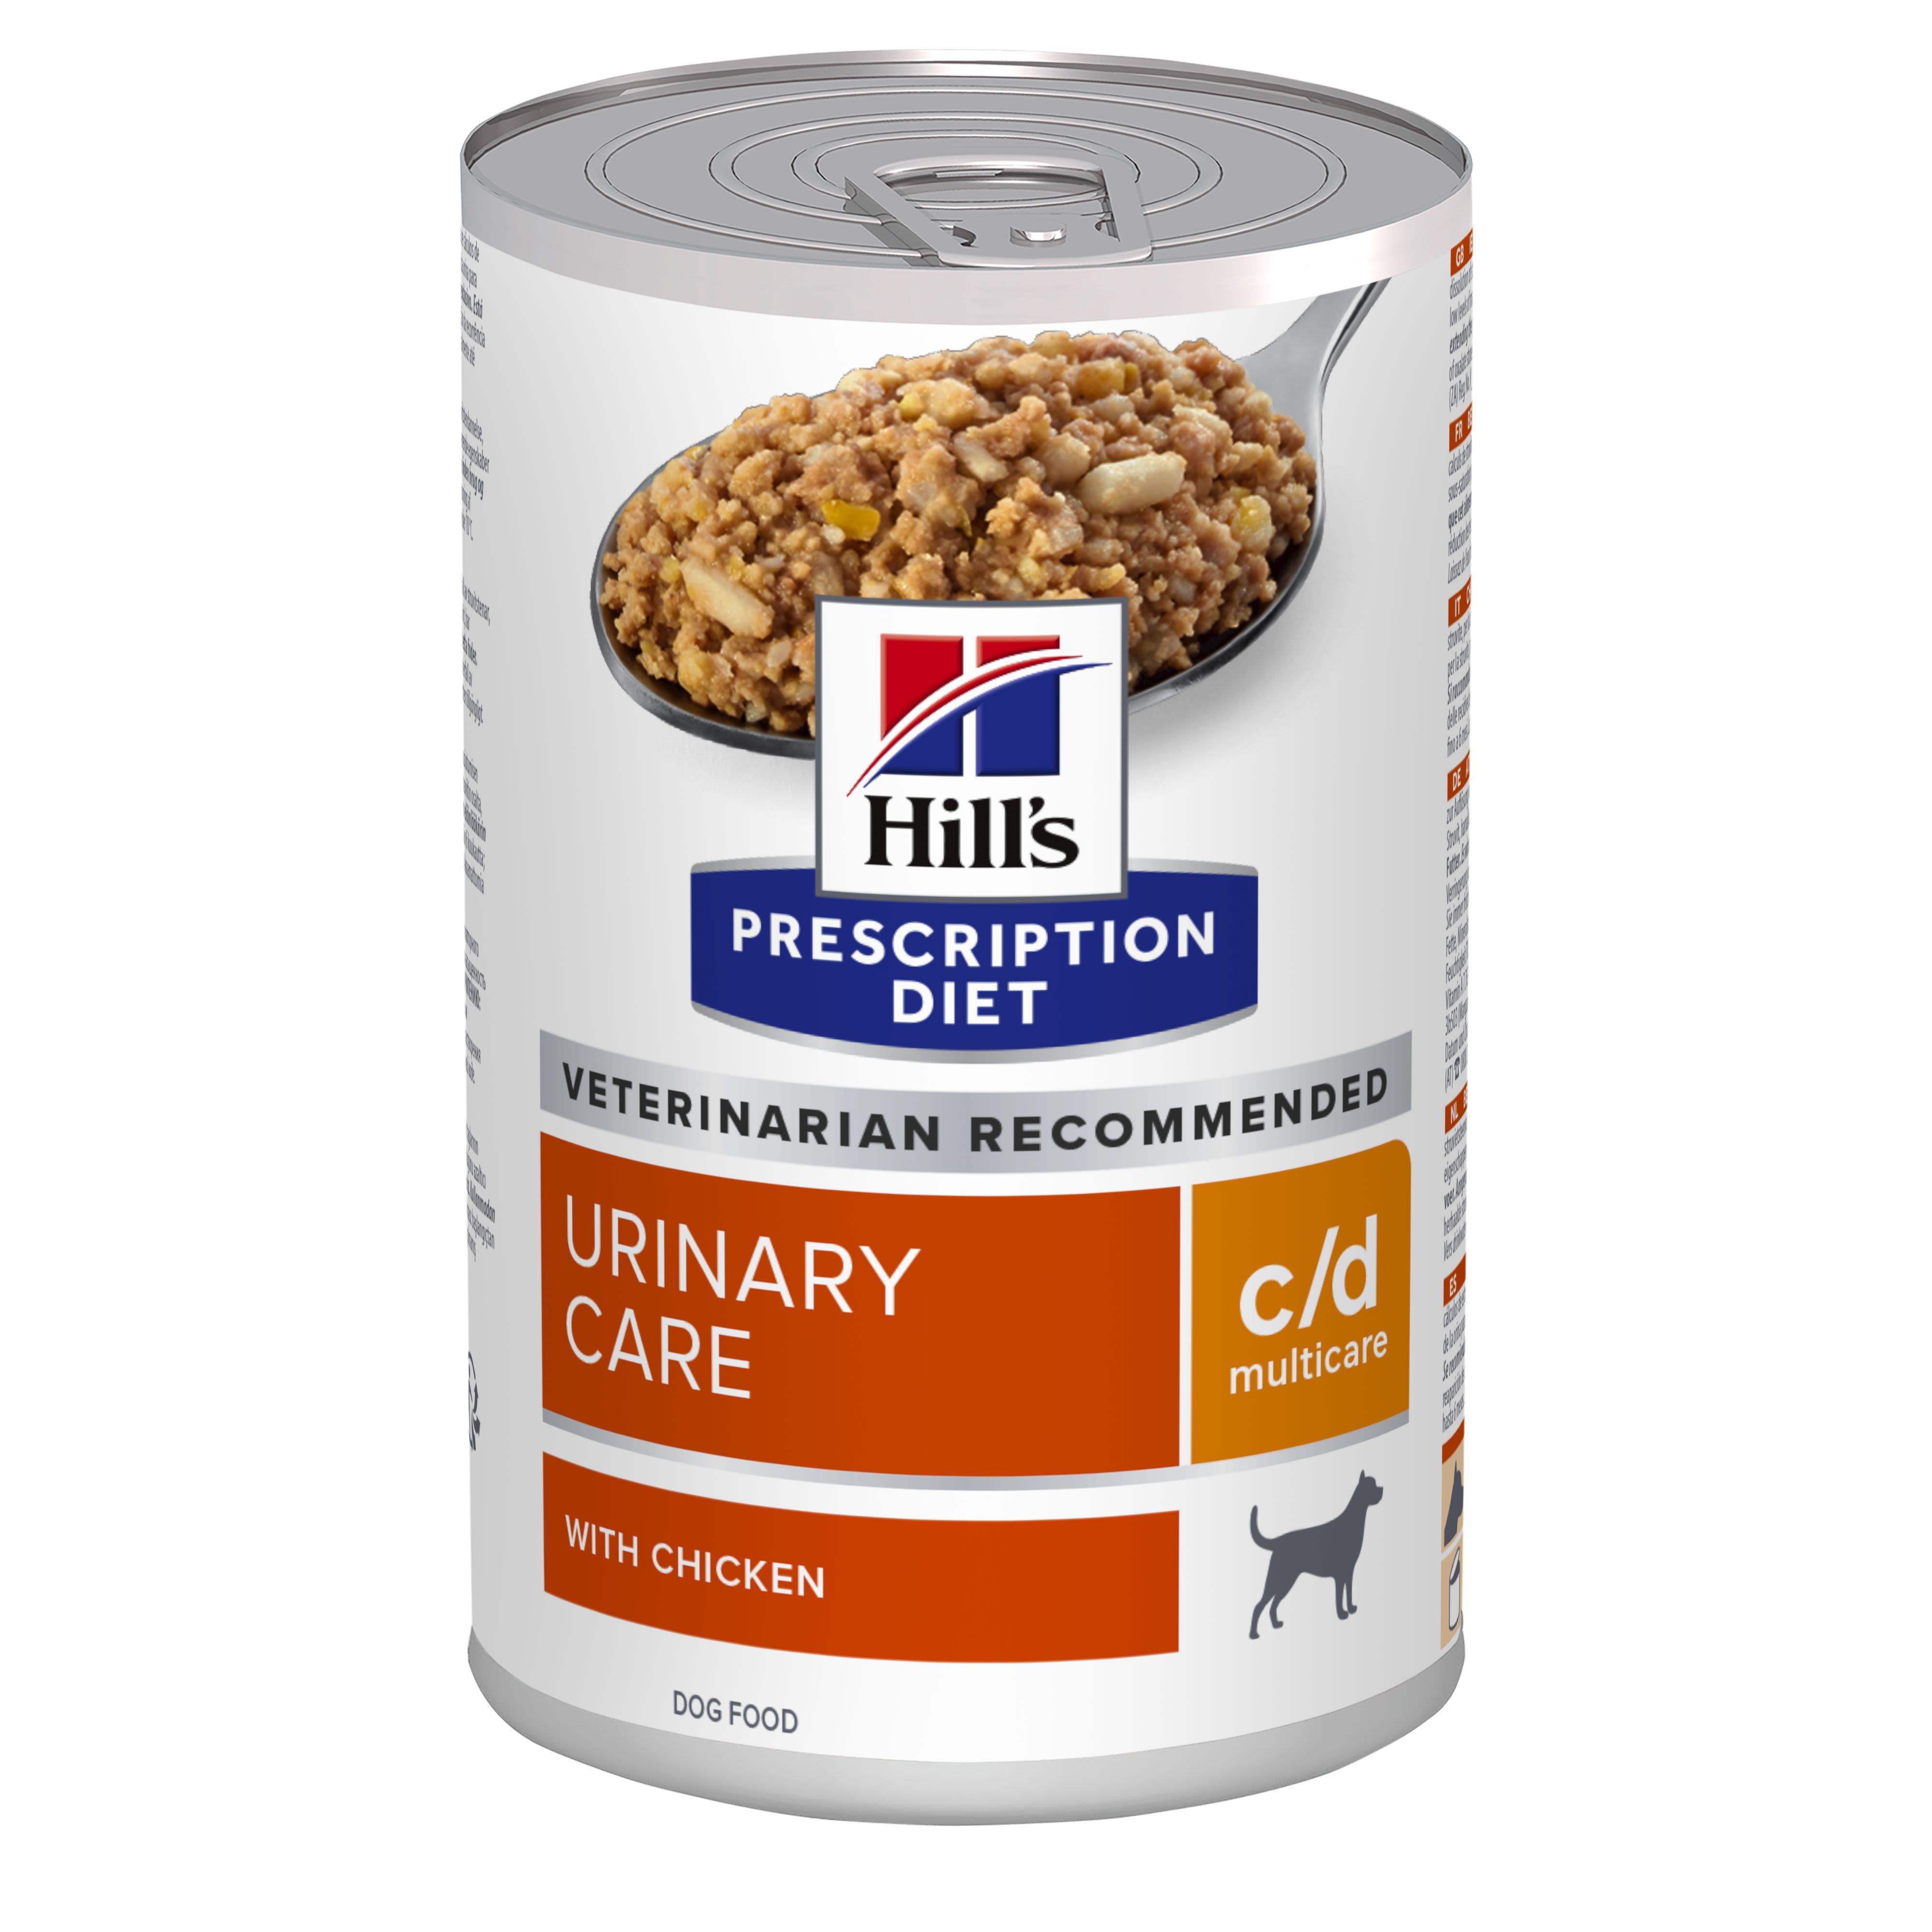 royal canin veterinary diet canine renal rf 14